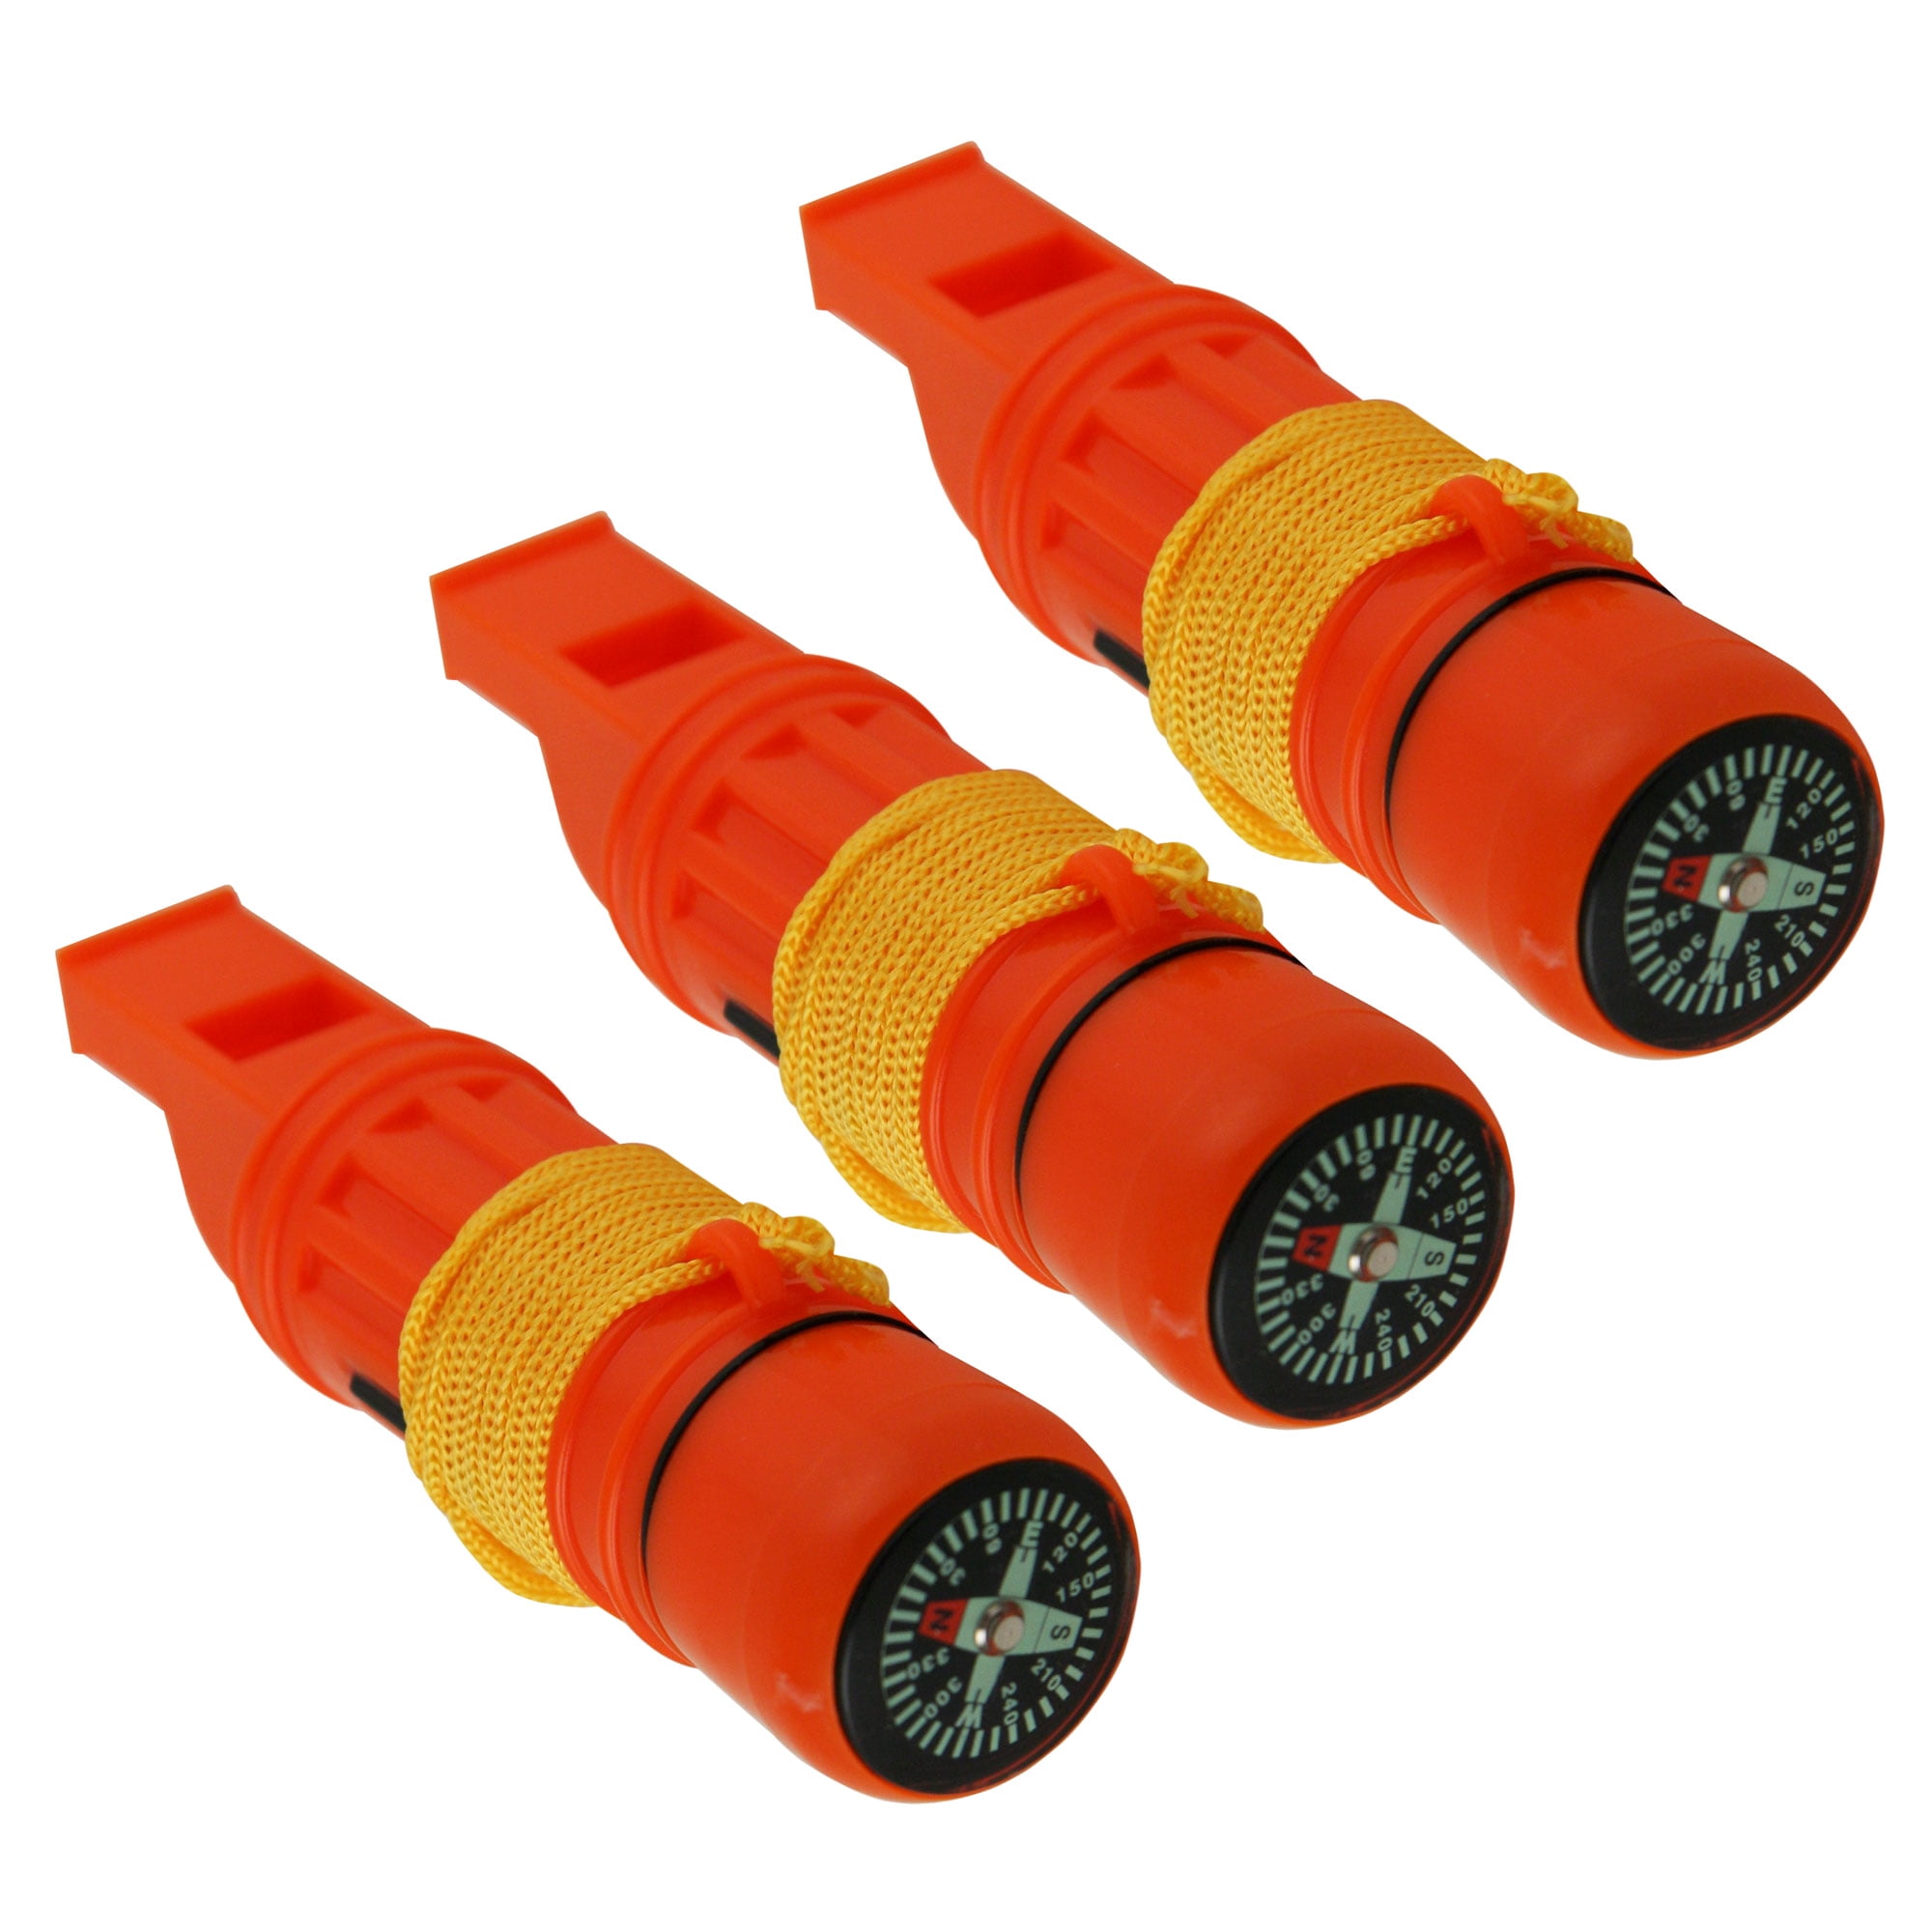 5in1 Emergency Hiking Camping Survival Compass Whistle Tool Color Orange #CCH5-1 